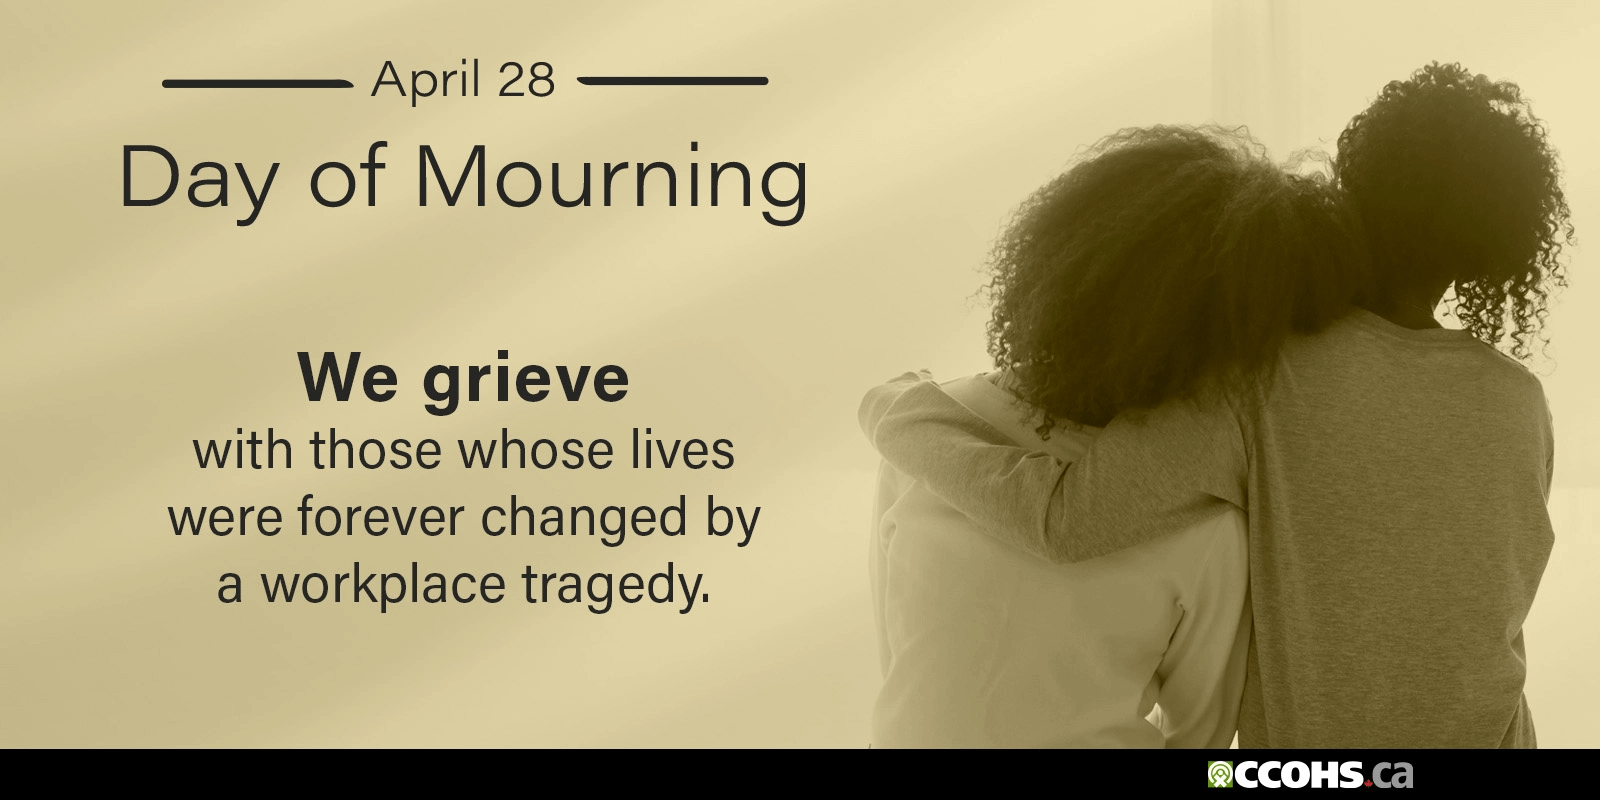 National Day of Mourning. We grieve with those whose lives were forever changed by a workplace tragedy.